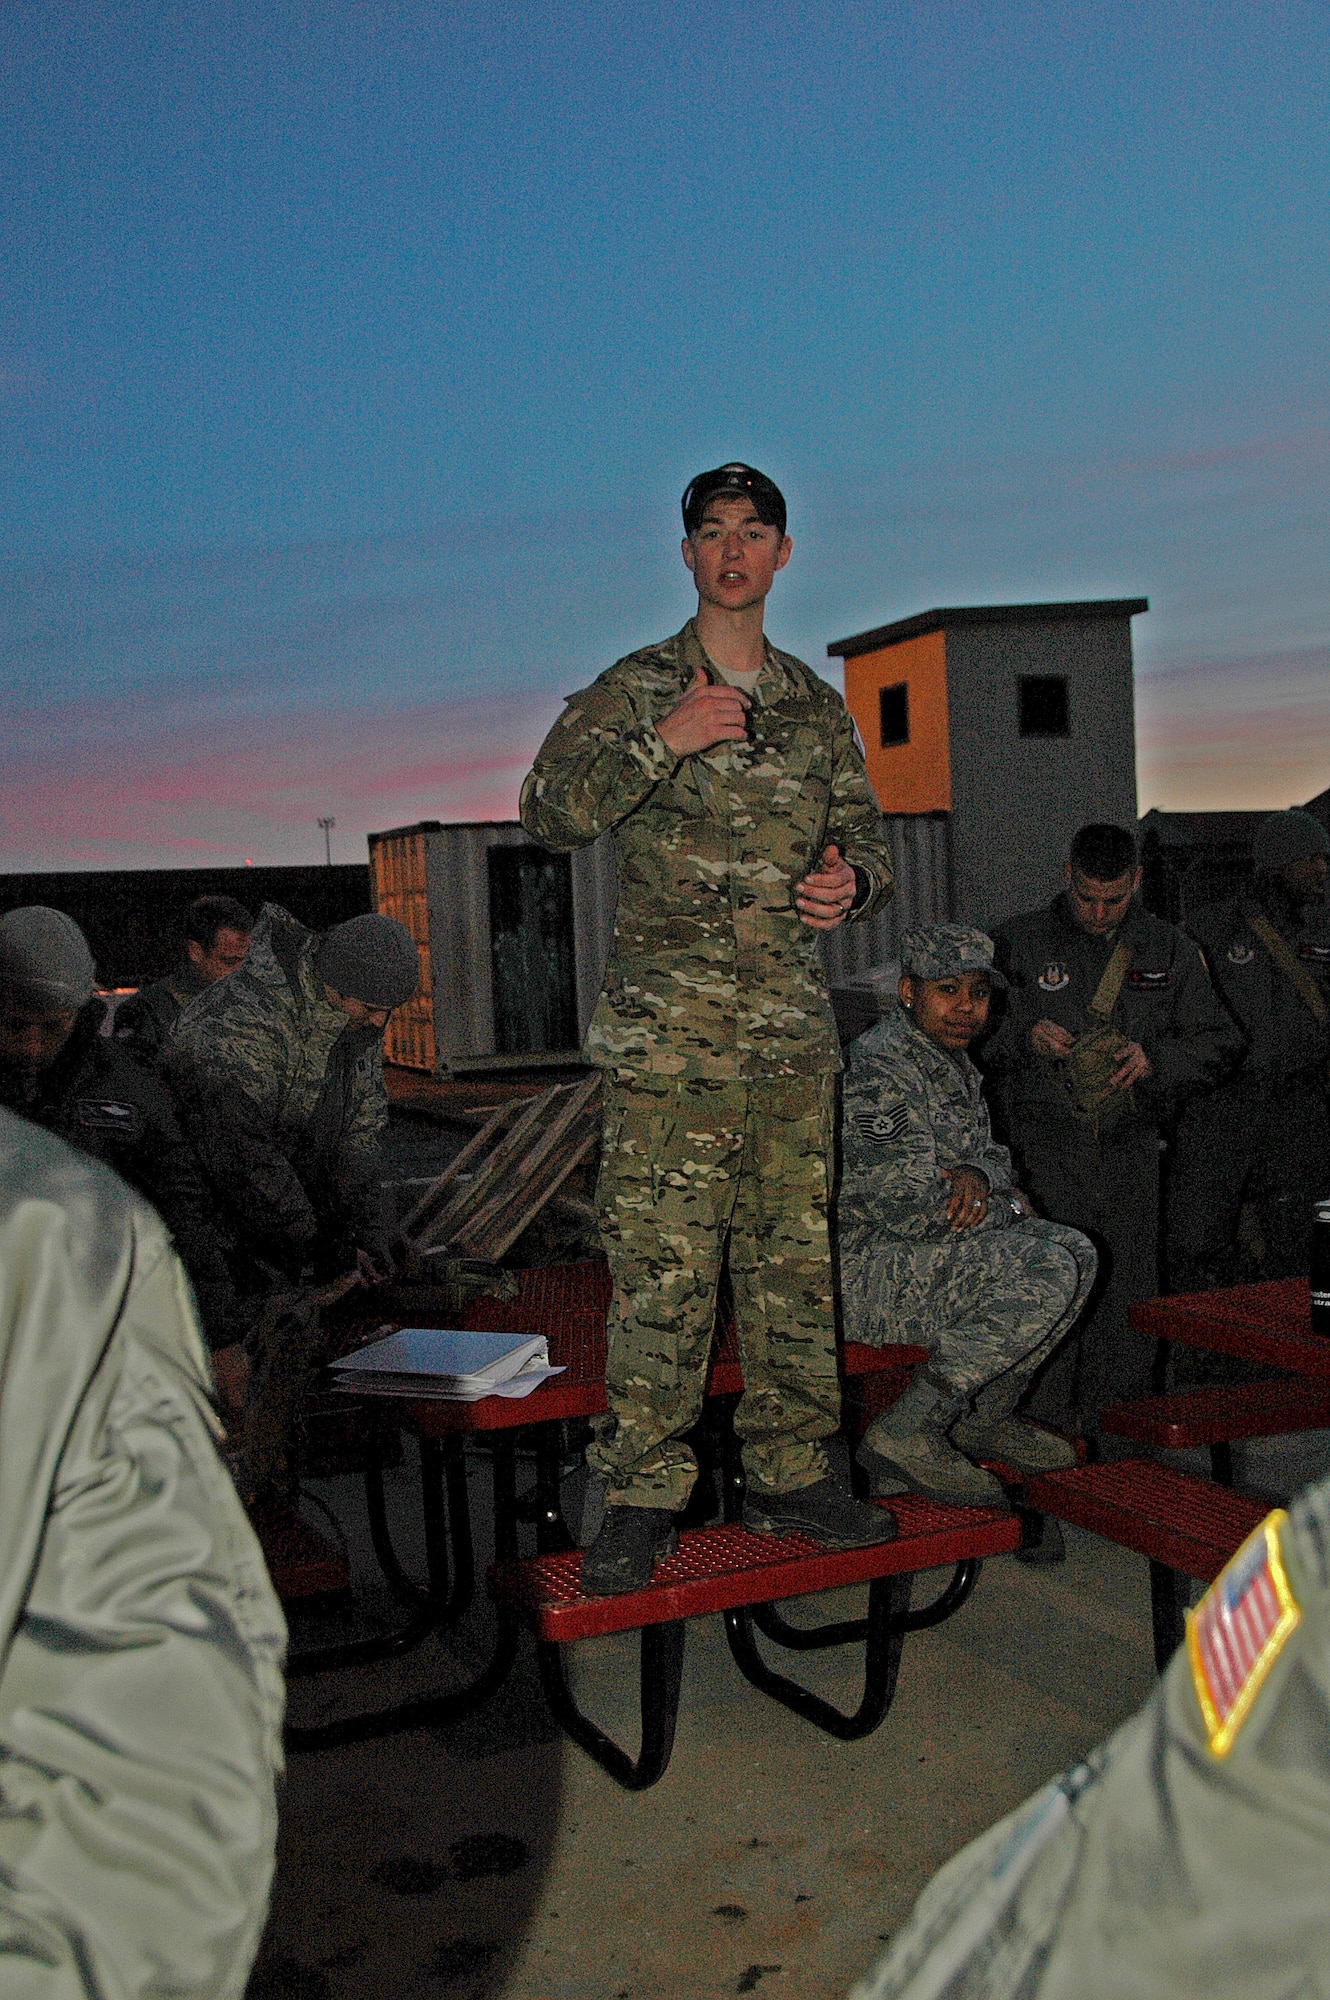 Staff Sergeant Chad Braunschweig, SERE Specialist with the 908th Operations Group, assisted by fellow specialists and civilian contractors, recently conducted combat survival training for members of the 908th Airlift Wing. Above, Sergeant Braunschweig briefs wingmen prior to the night escape and evasion course. (Air Force photo by Tech. Sgt. Jay Ponder)